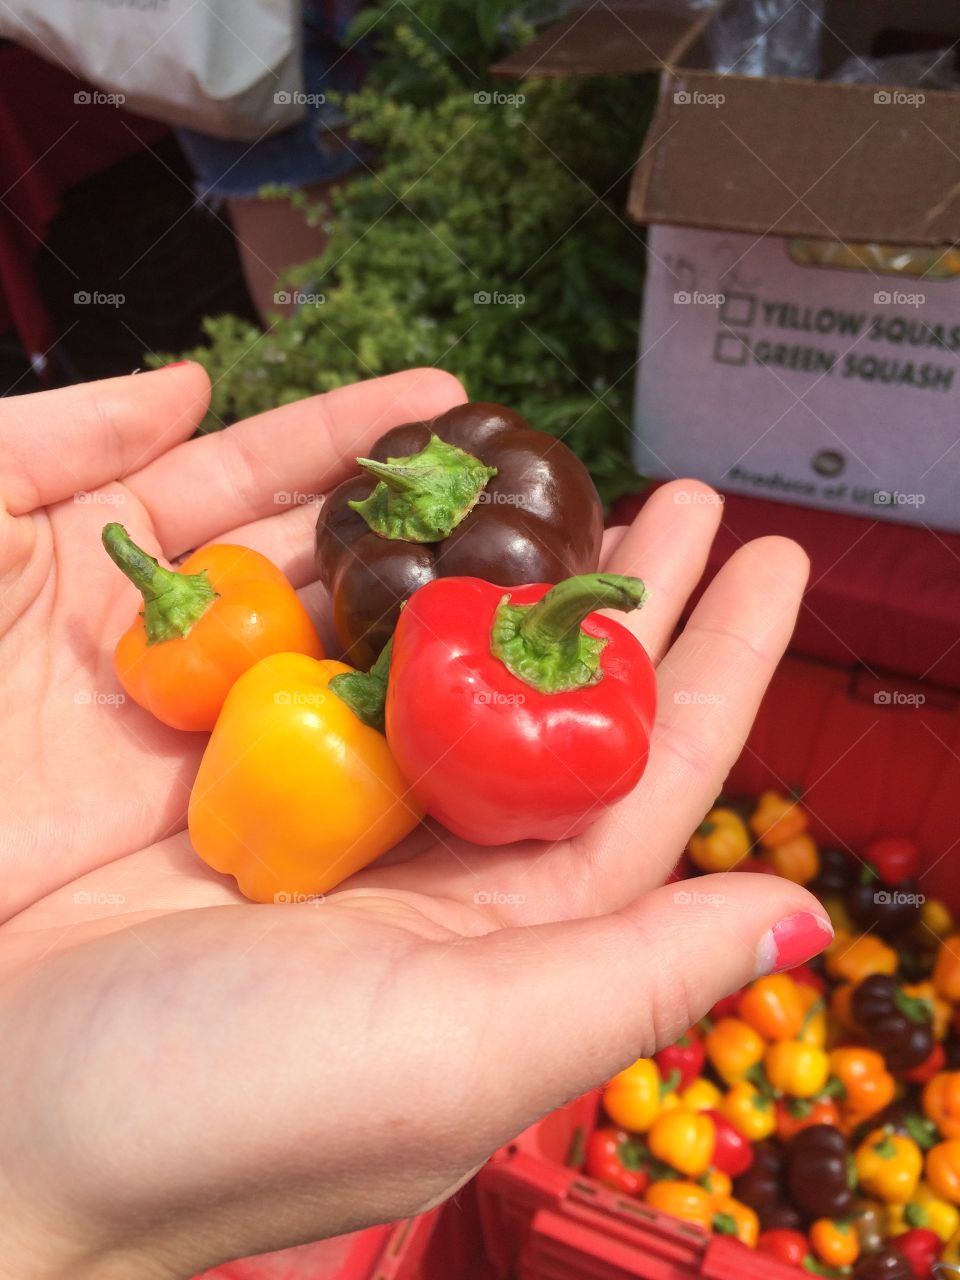 The smallest peppers I've ever seen at a farmers market in Burlington VT